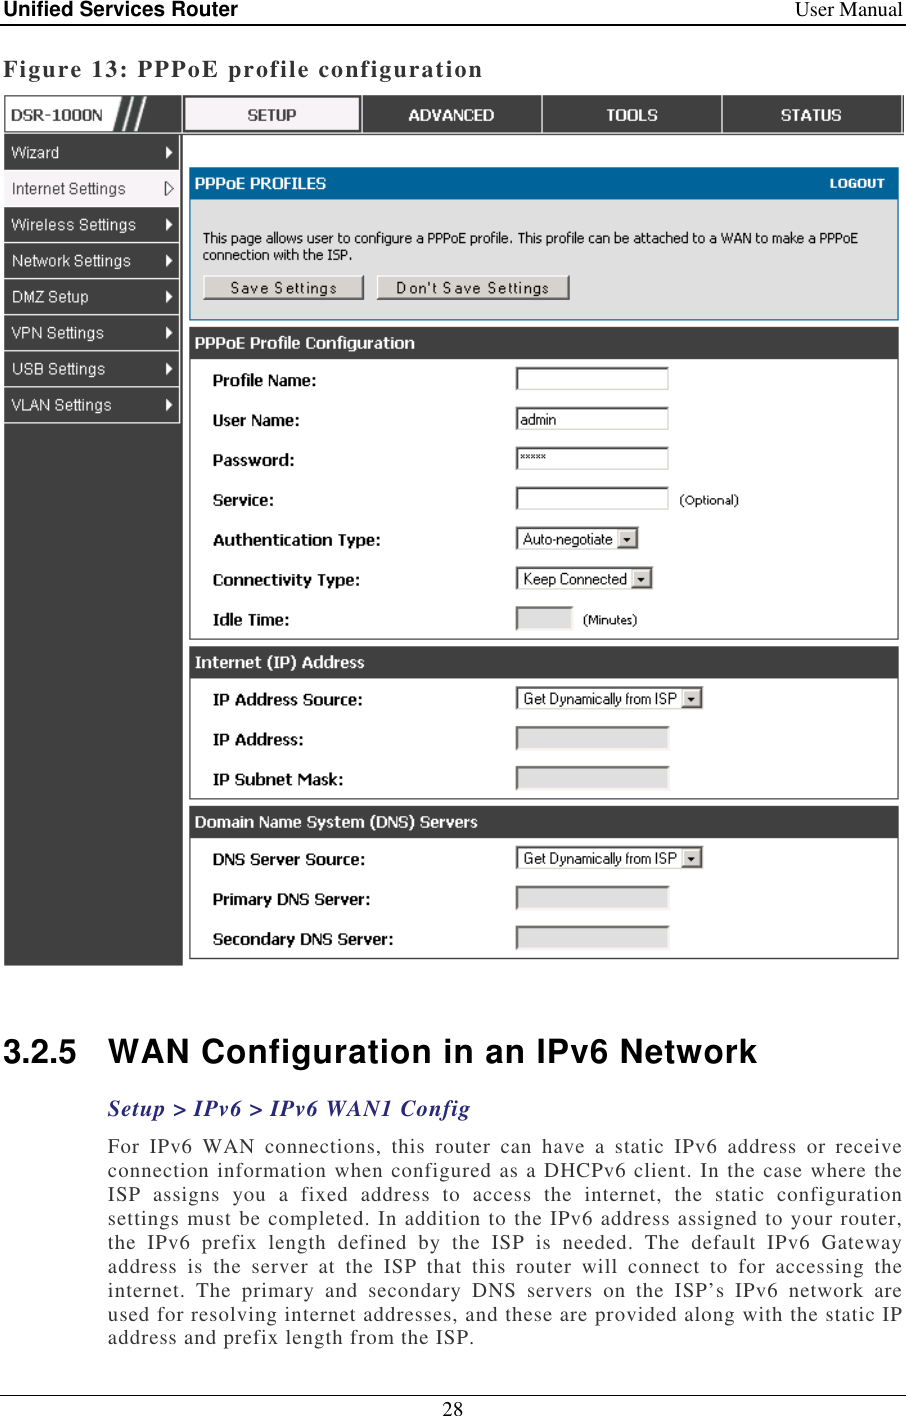 Unified Services Router    User Manual 28  Figure 13: PPPoE profile configuration   3.2.5  WAN Configuration in an IPv6 Network Setup &gt; IPv6 &gt; IPv6 WAN1 Config For  IPv6  WAN  connections,  this  router  can  have  a  static  IPv6  address  or  receive connection information when configured as a DHCPv6 client. In the case where the ISP  assigns  you  a  fixed  address  to  access  the  internet,  the  static  configuration settings must be completed. In addition to the IPv6 address assigned to your router, the  IPv6  prefix  length  defined  by  the  ISP  is  needed.  The  default  IPv6  Gateway address  is  the  server  at  the  ISP  that  this  router  will  connect  to  for  accessing  the internet.  The  primary  and  secondary  DNS  servers  on  the  ISP’s  IPv6  network  are used for resolving internet addresses, and these are provided along with the static IP address and prefix length from the ISP.  